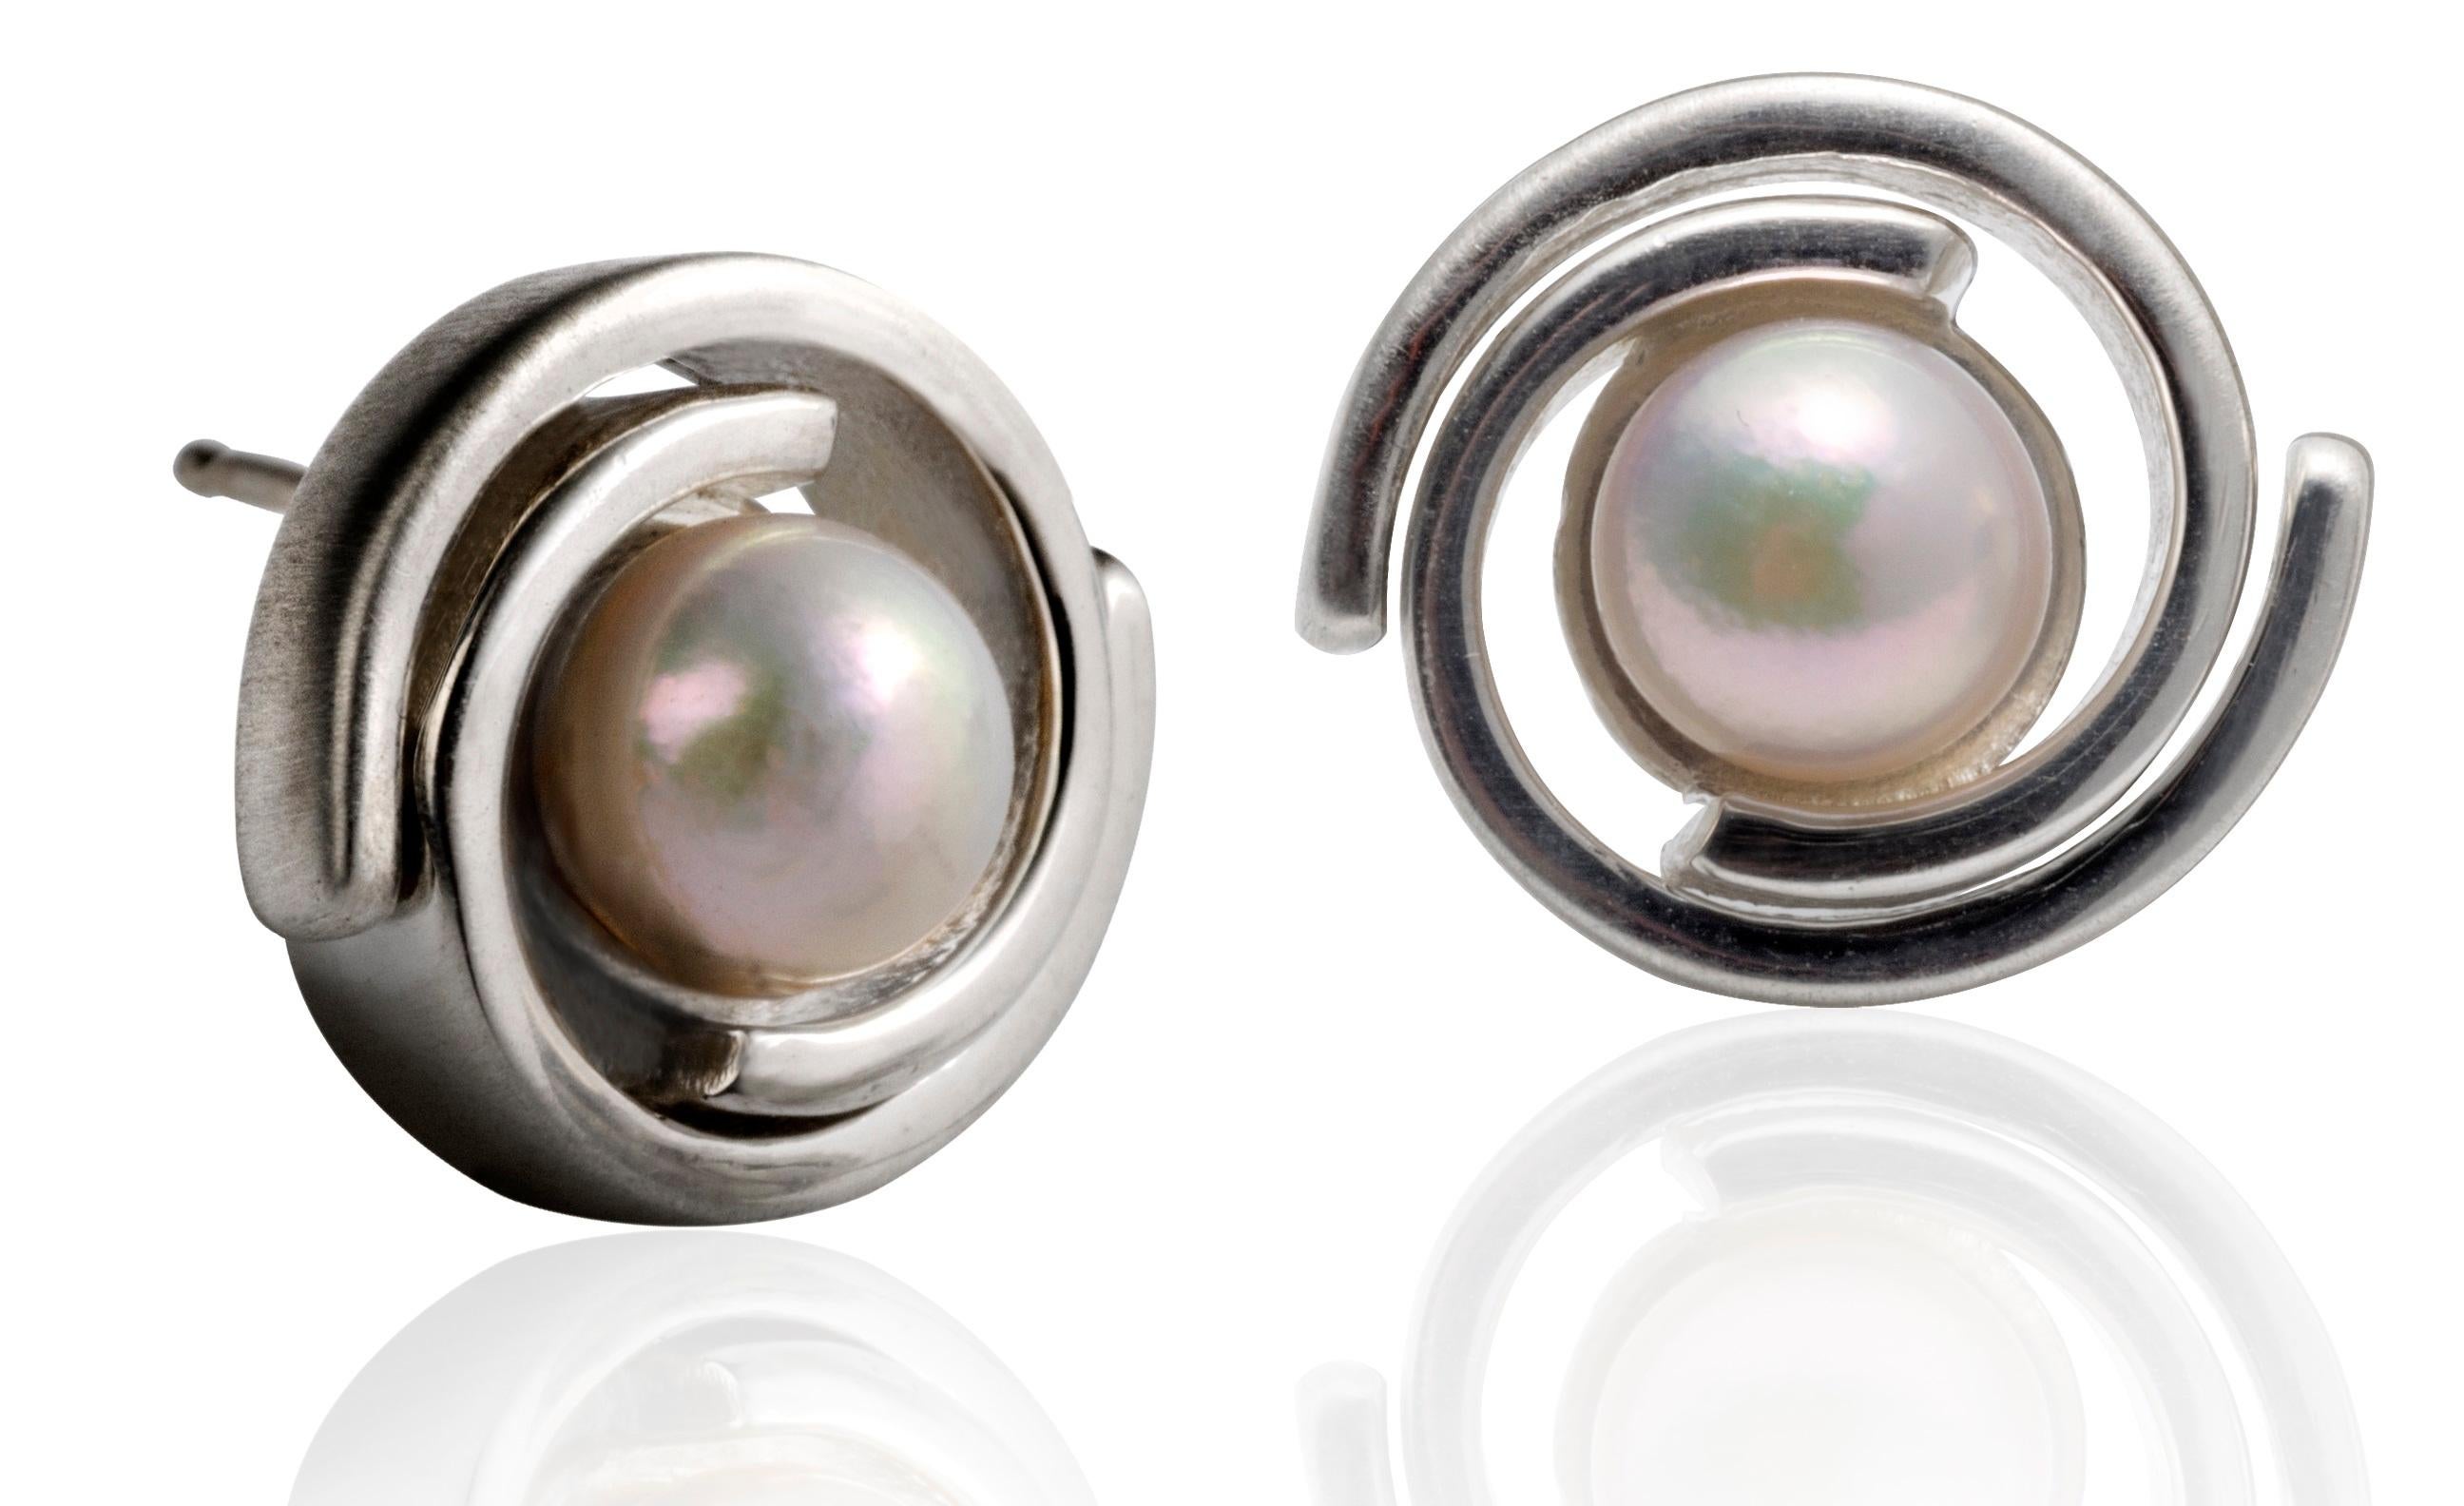 This simple 925 sterling silver stud, is set with a pair of lustrous blue grey Akoya pearls. The earrings are hand finished with satin sides and high polish top. These Double Spiral post earrings are part of the Orbit collection.  (There is nothing